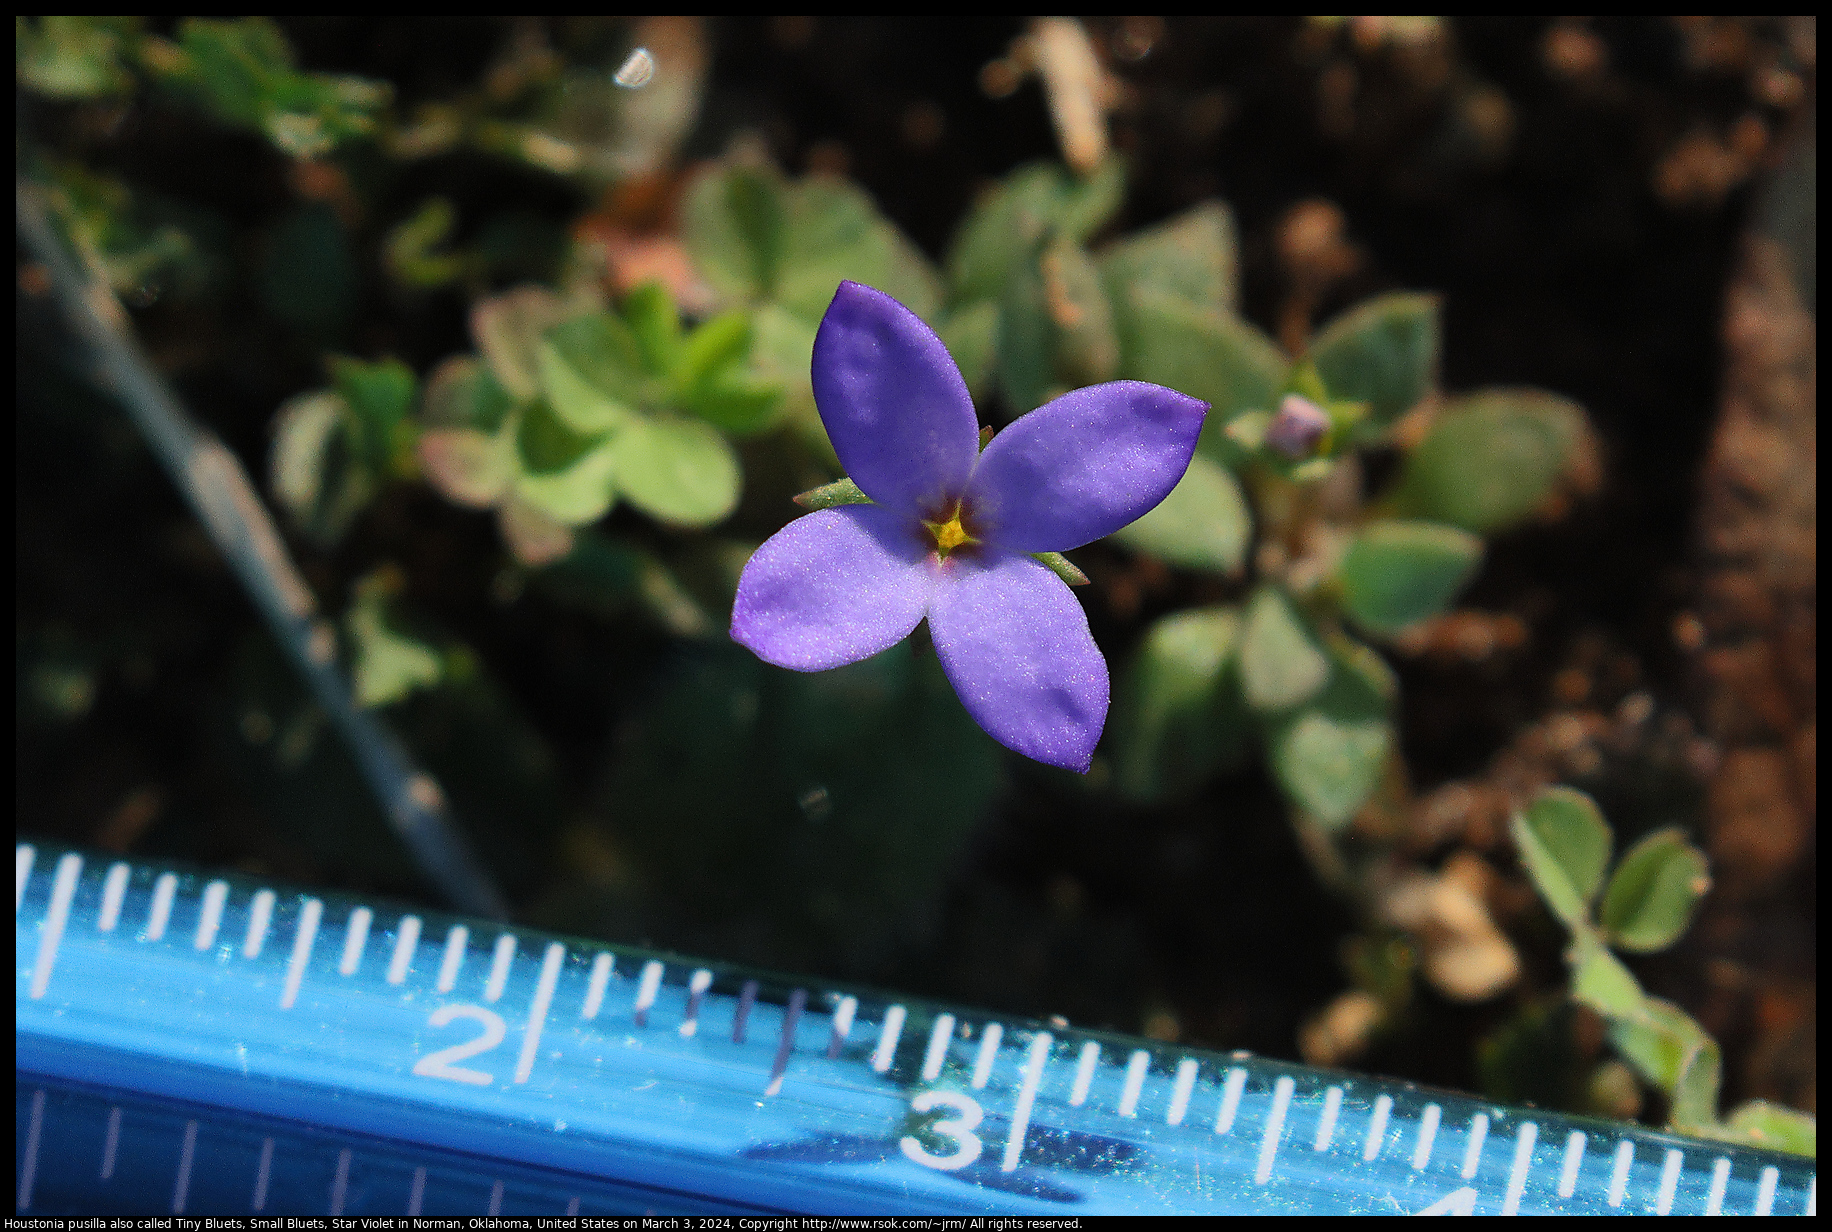 Houstonia pusilla also called Tiny Bluets, Small Bluets, Star Violet in Norman, Oklahoma, United States on March 3, 2024